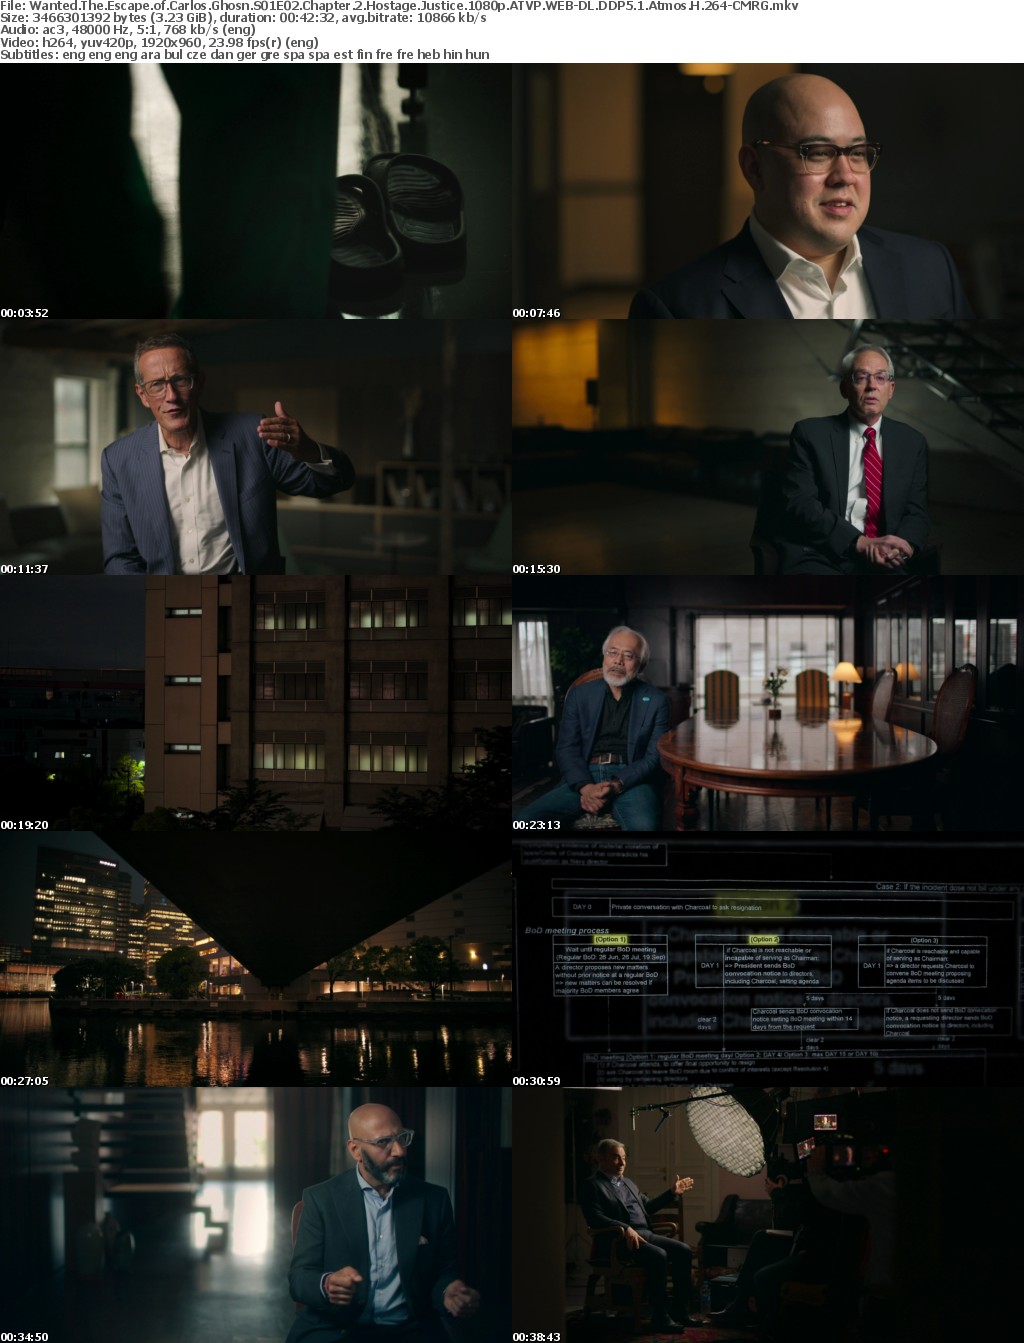 Wanted The Escape of Carlos Ghosn S01E02 Chapter 2 Hostage Justice 1080p ATVP WEB-DL DDP5 1 Atmos H 264-CMRG